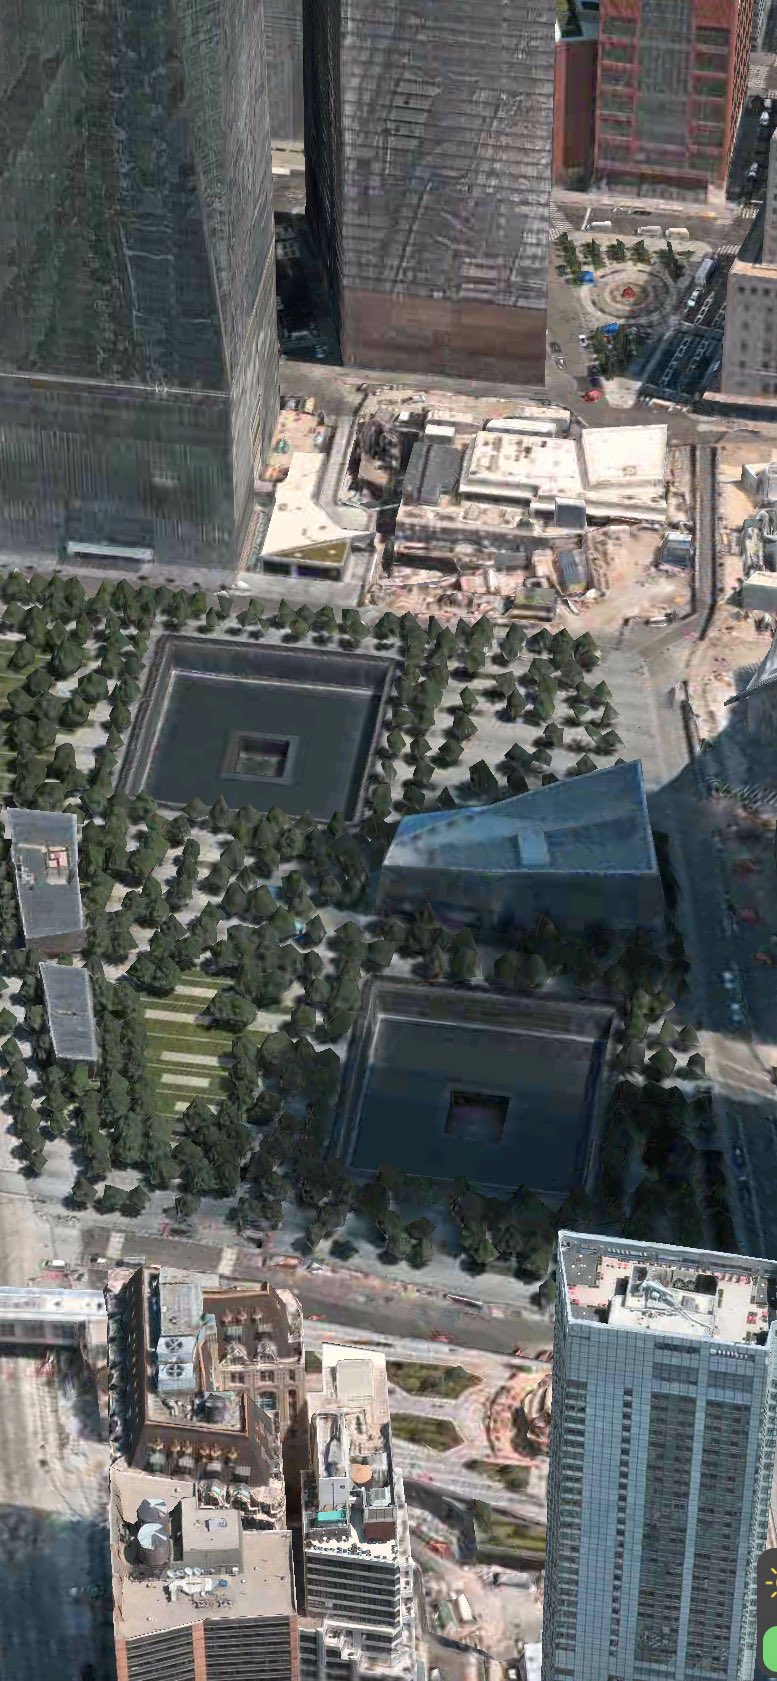 Thinkboodles On Twitter Just Realized That The 9 11 Memorial Reflecting Pools Are Literally The Roblox Logo - roblox on twitter can you top thinknoodles million dollar jump